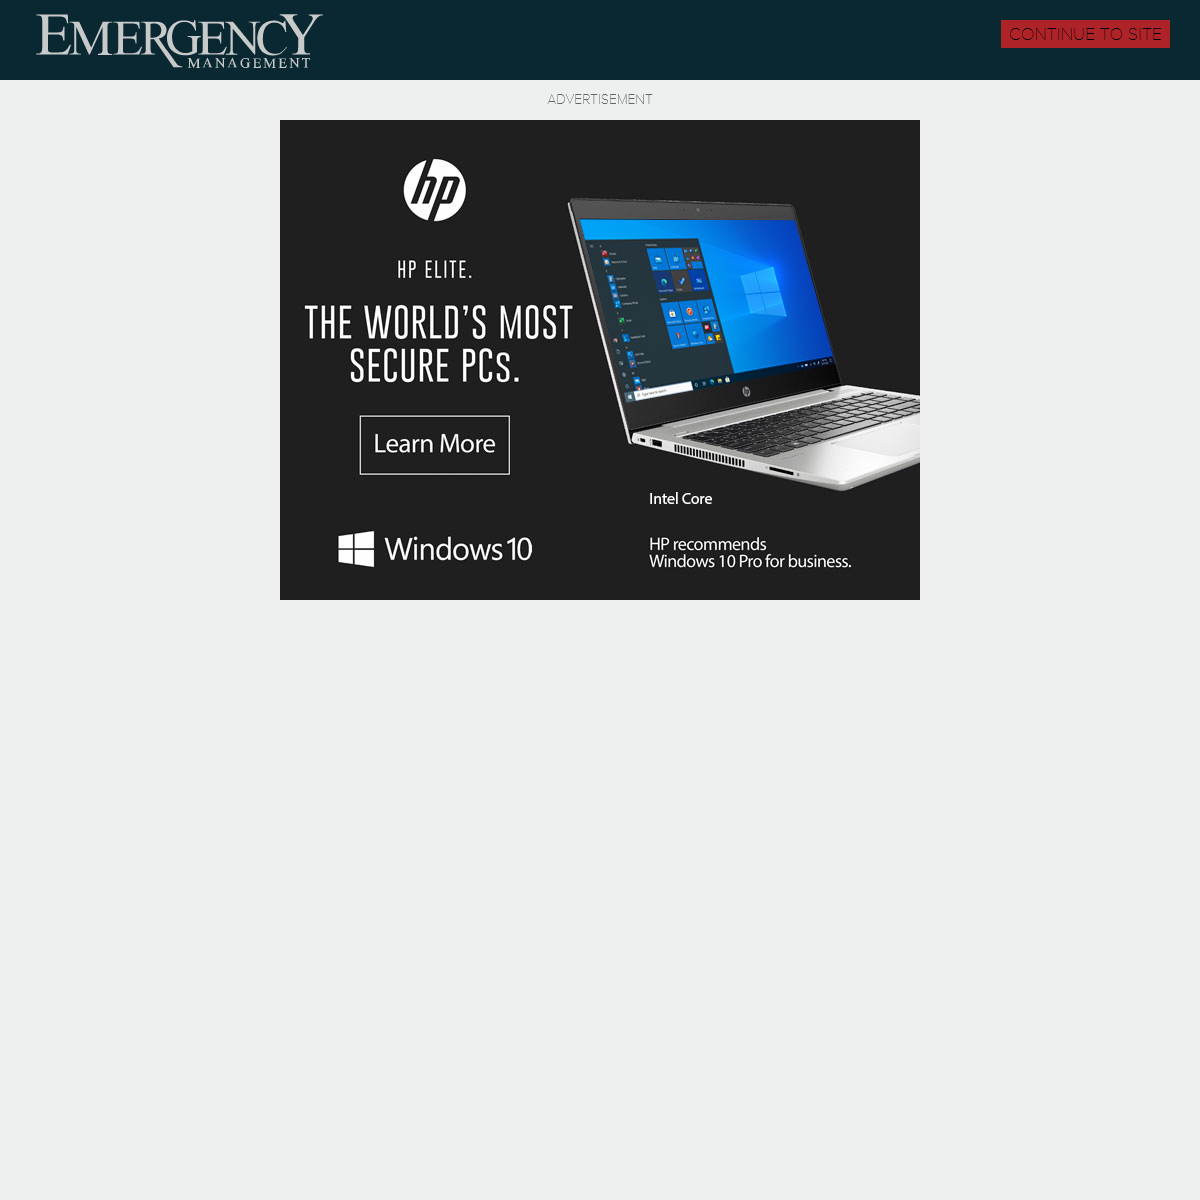 A complete backup of emergencymgmt.com